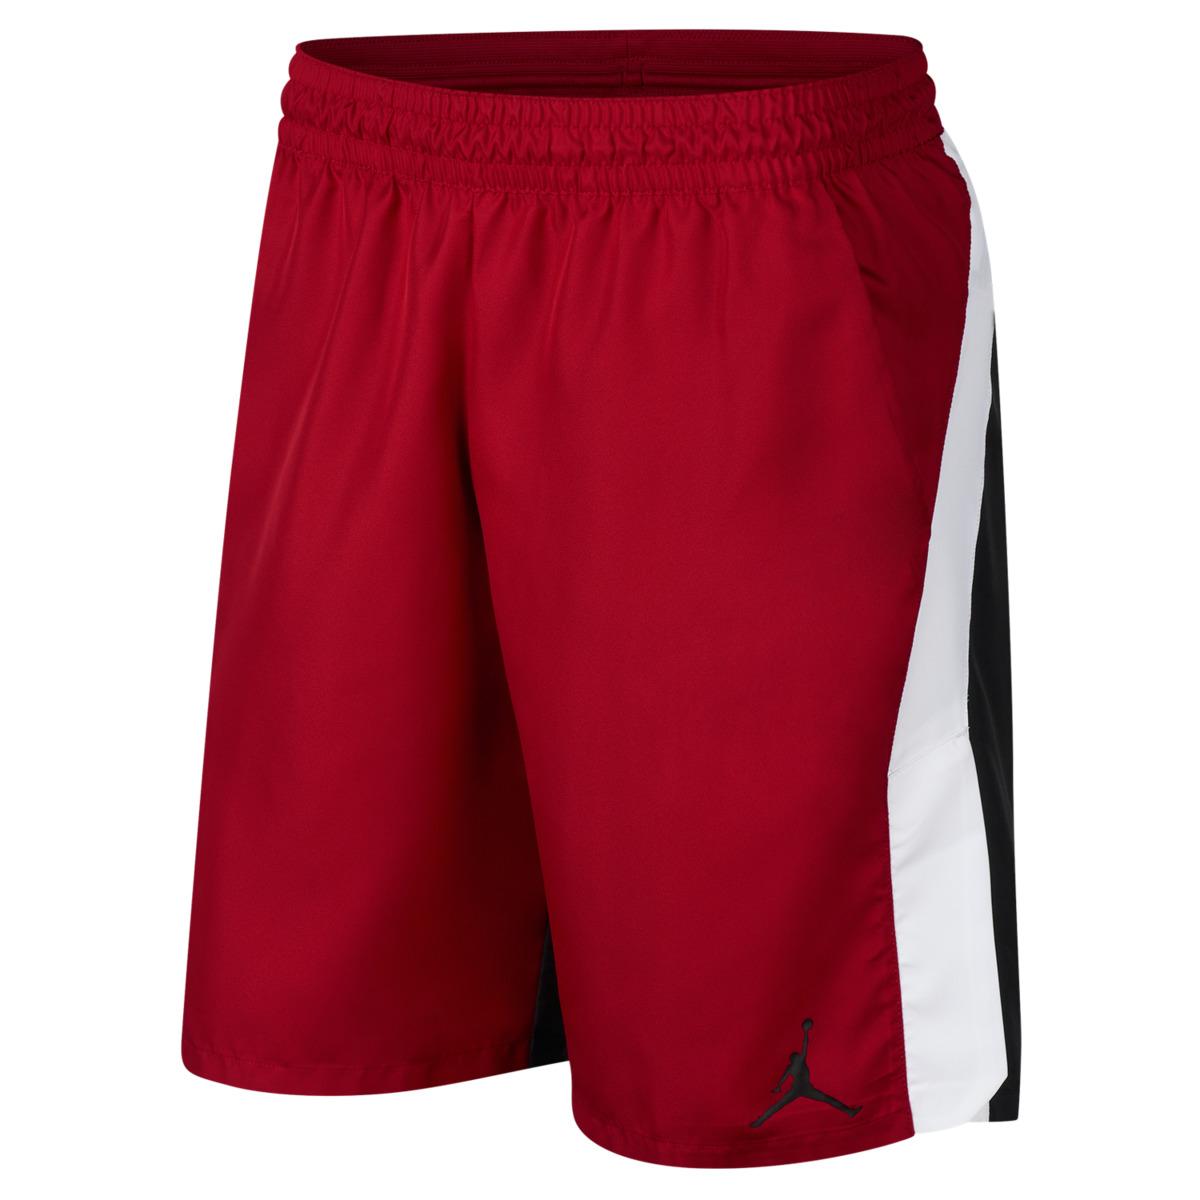 Nike Synthetic Nike Dri-fit 23 Alpha Shorts in Red for Men - Lyst